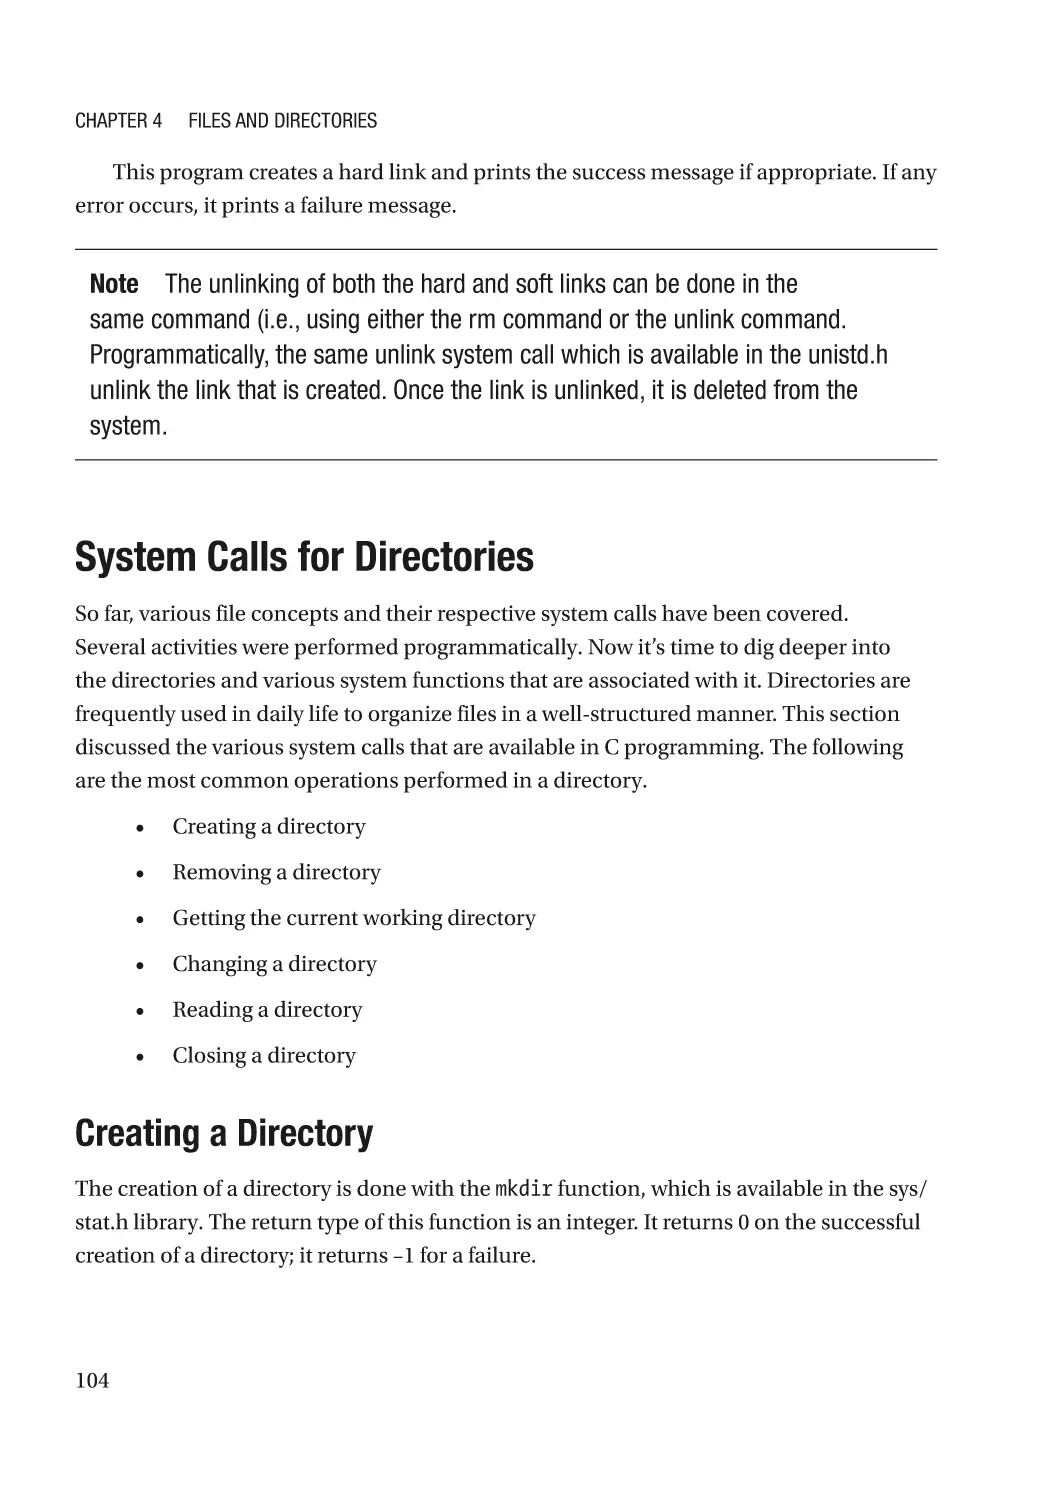 System Calls for Directories
Creating a Directory